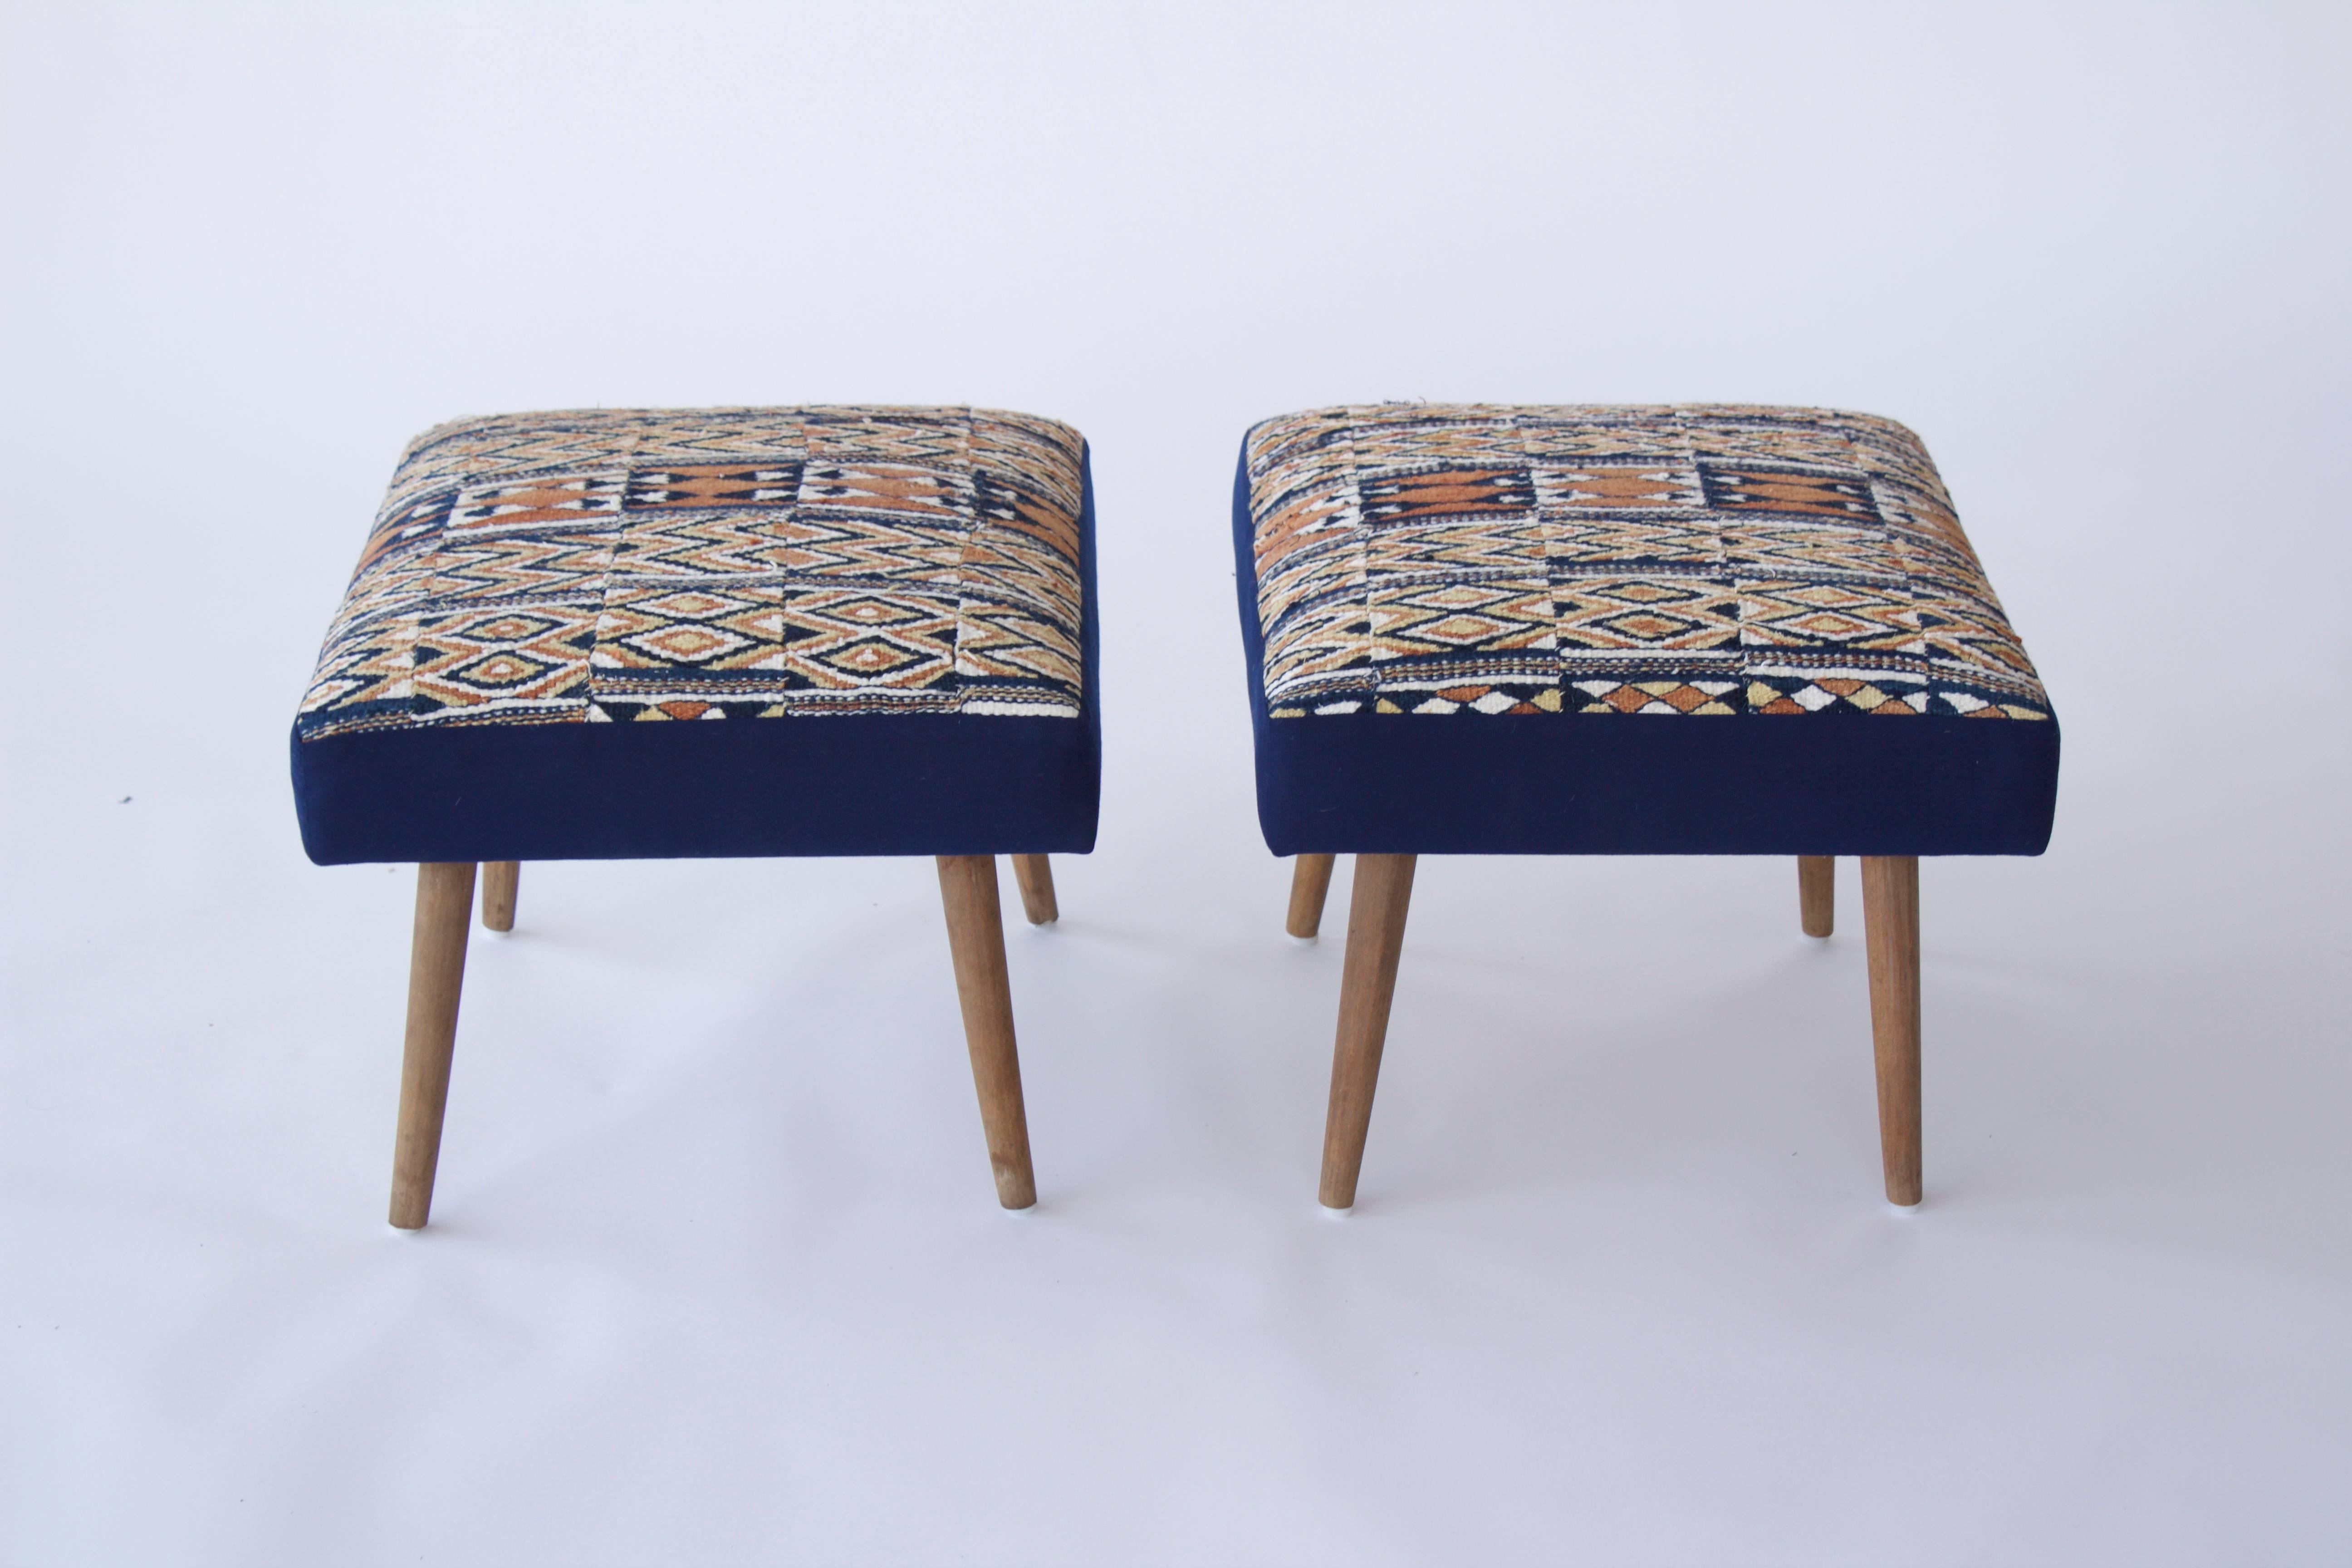 20th Century Pair of Vintage French Stools with Vintage African Textile